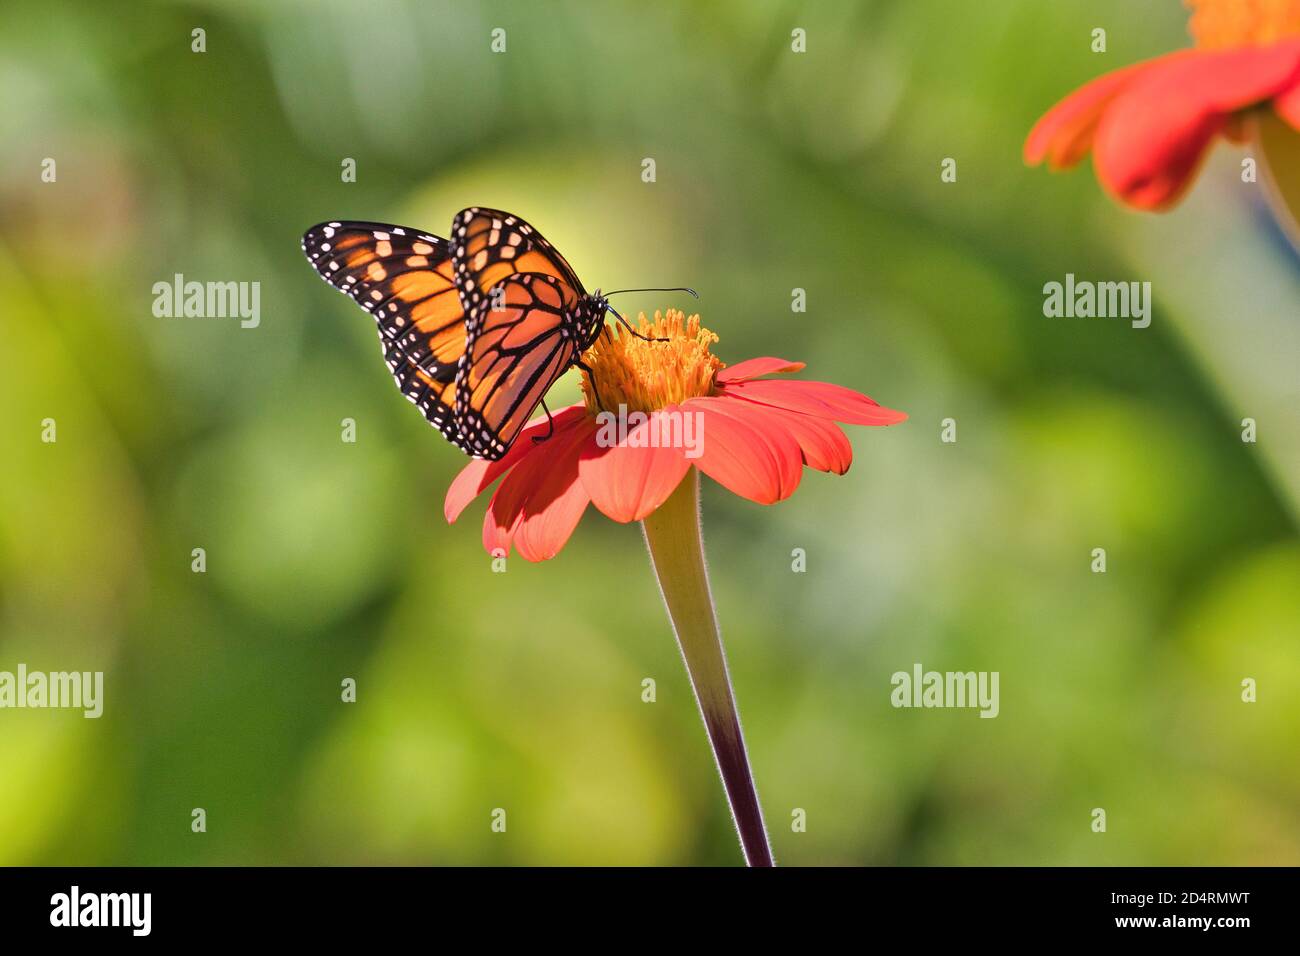 Beautiful monarch butterfly seen from behind with wings slightly spread sipping nectar from a bright orange flower. Stock Photo